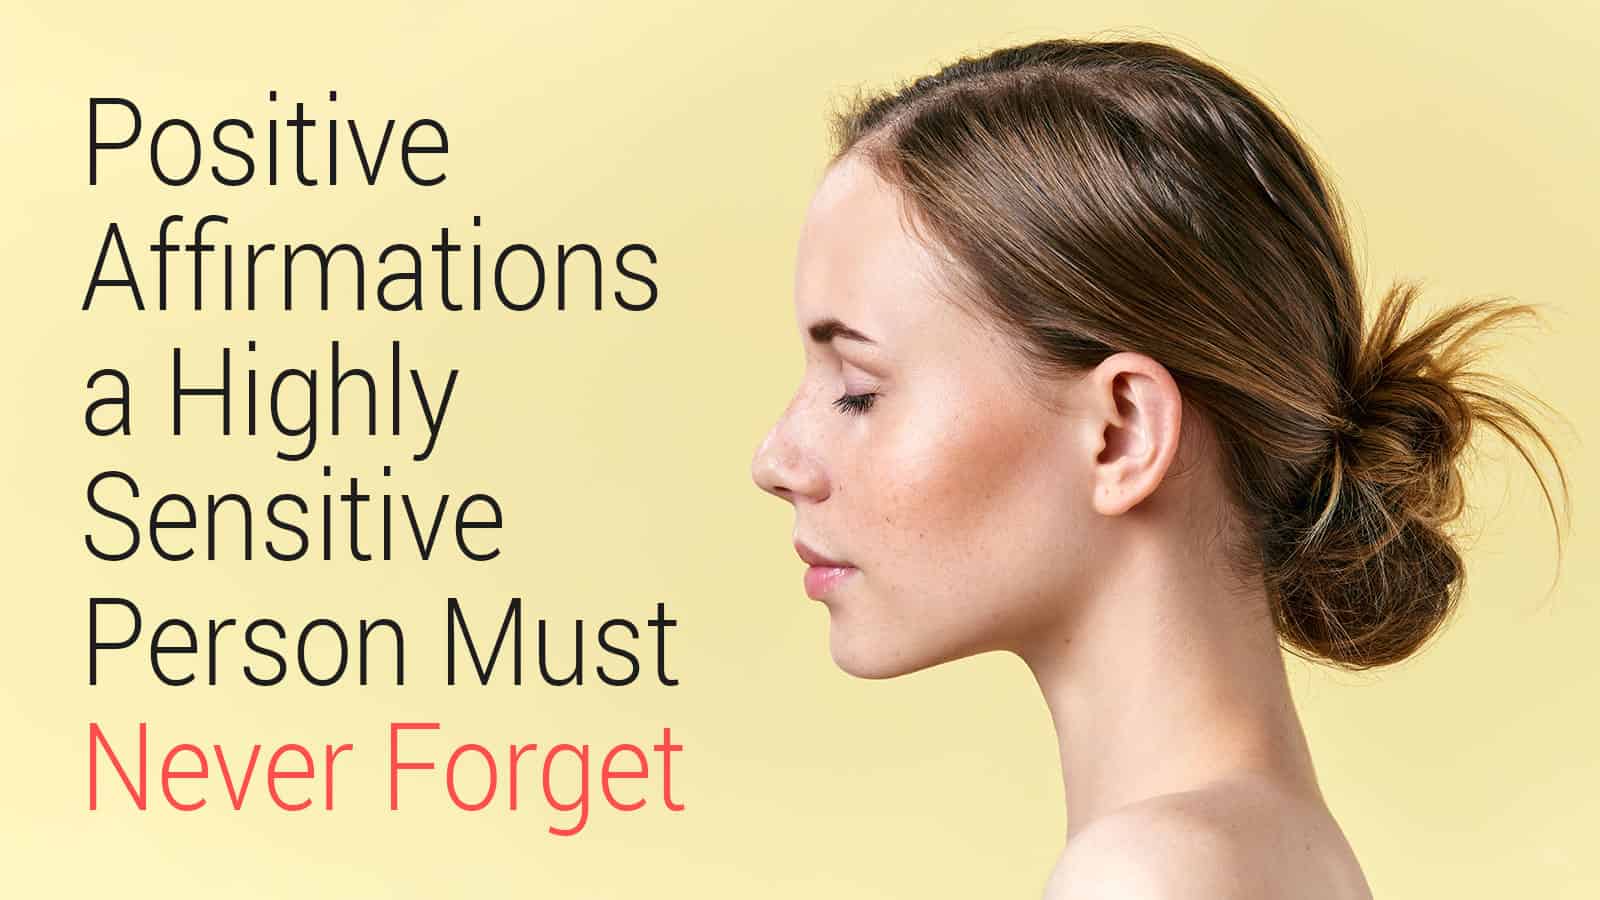 Positive-Affirmations-a-Highly-Sensitive-Person-Must-Never-Forget2.jpg